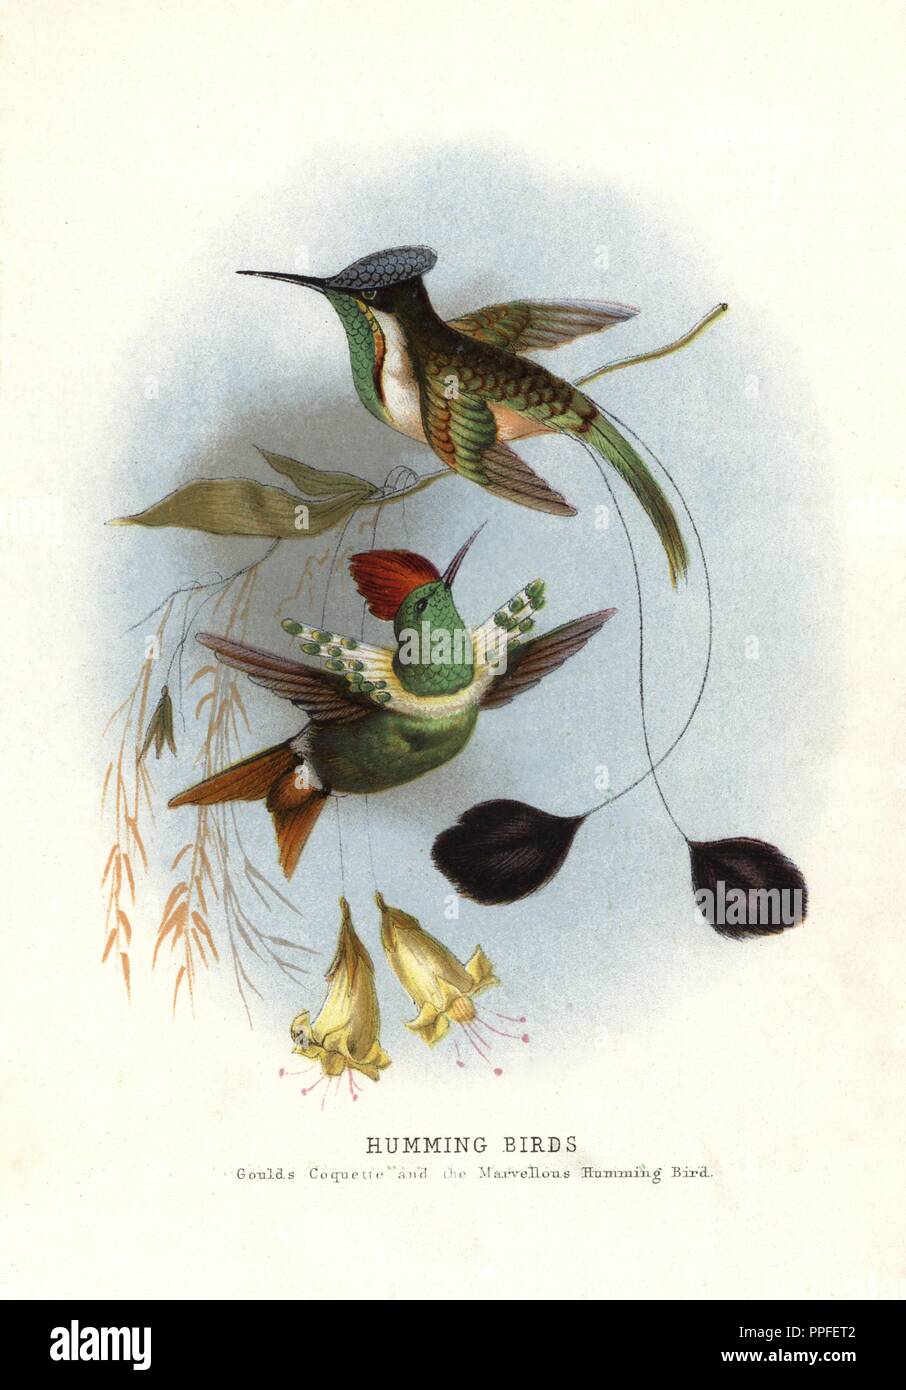 Dot-eared coquette, Lophornis gouldii, and marvellous spatuletail, Loddigesia mirabilis. Chromolithograph by unknown artist/engraver from Mary and Elizabeth Kirby's 'Beautiful Birds in Far-Off Lands,' T. Nelson, London, 1872. Mary Kirby (1817-1893) and Elizabeth Kirby (1823-1873) were two Victorian sisters who wrote many natural history books for children. Stock Photo